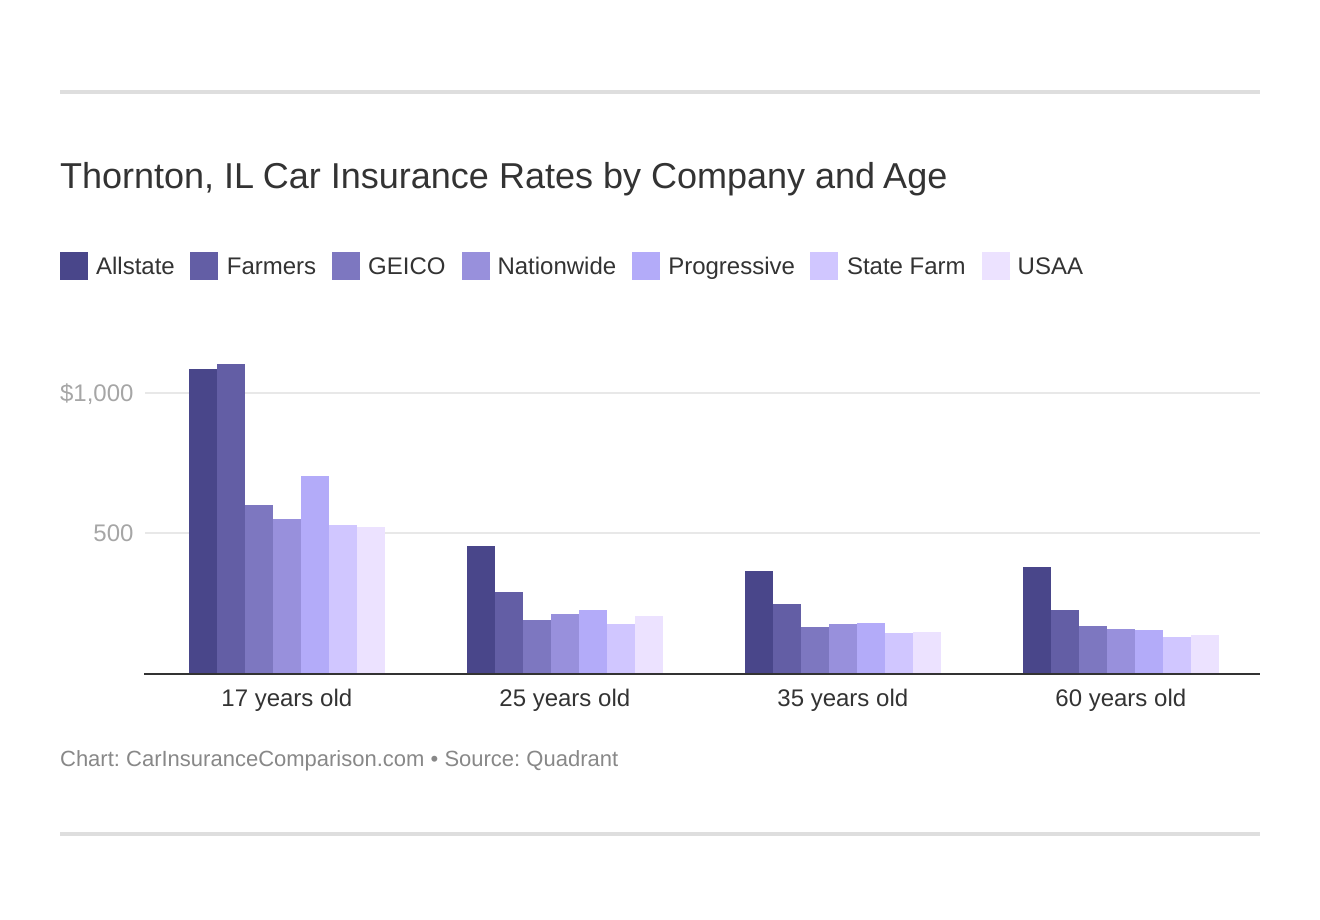 Thornton, IL Car Insurance Rates by Company and Age